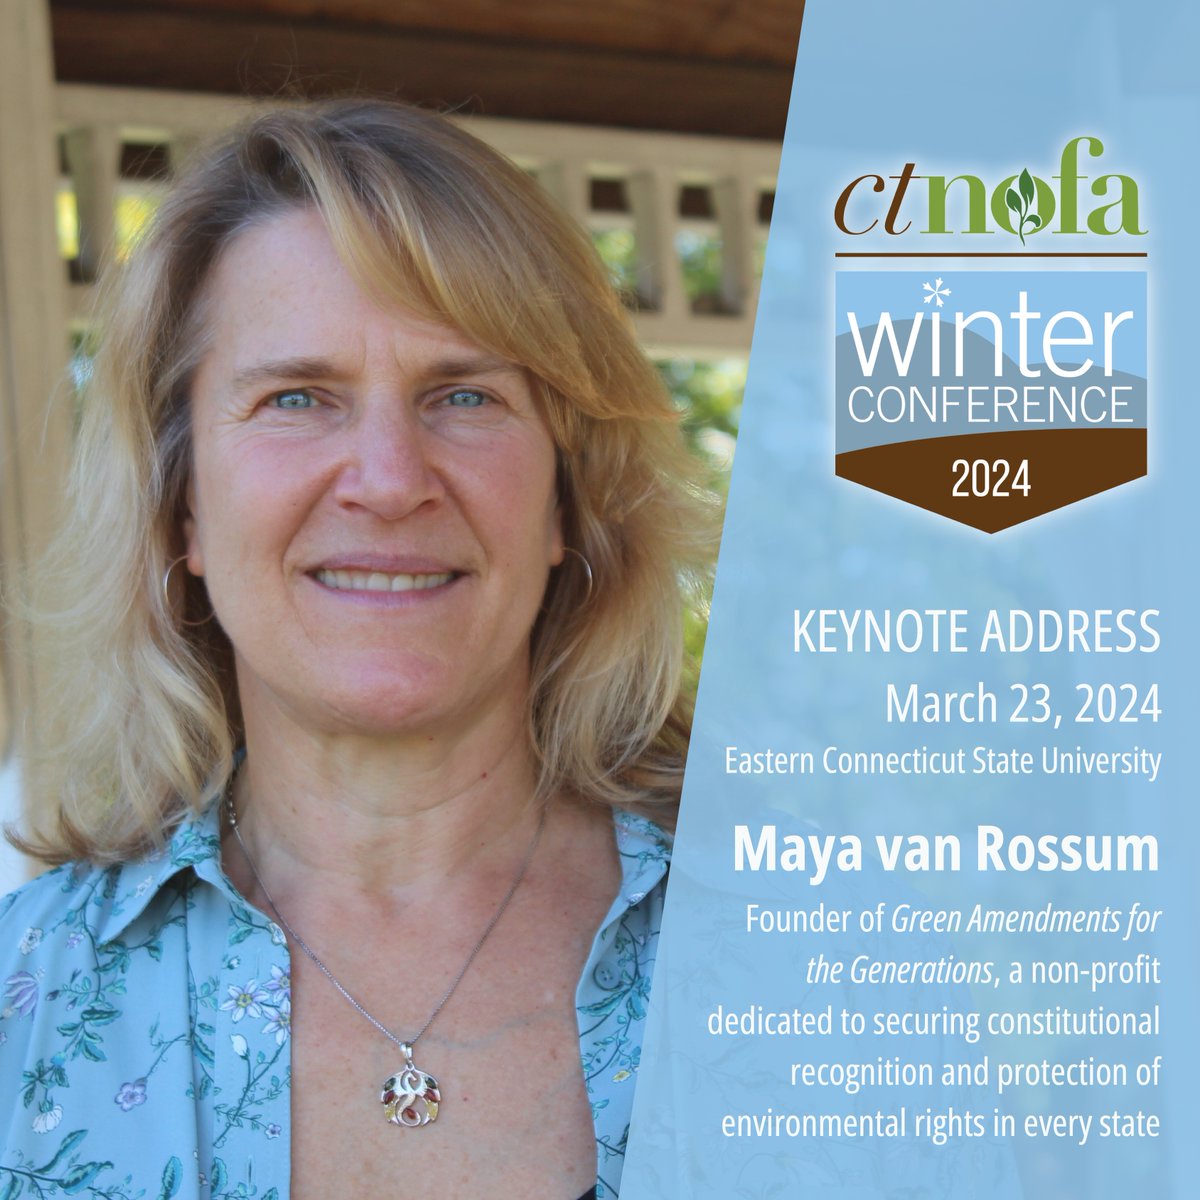 We're excited to announce that the keynote speaker for the 2024 winter conference will be Maya van Rossum, founder of@GreenAmendments. Save the date - March 23, 2024, and register to join us. ctnofa.org/winter-confere…